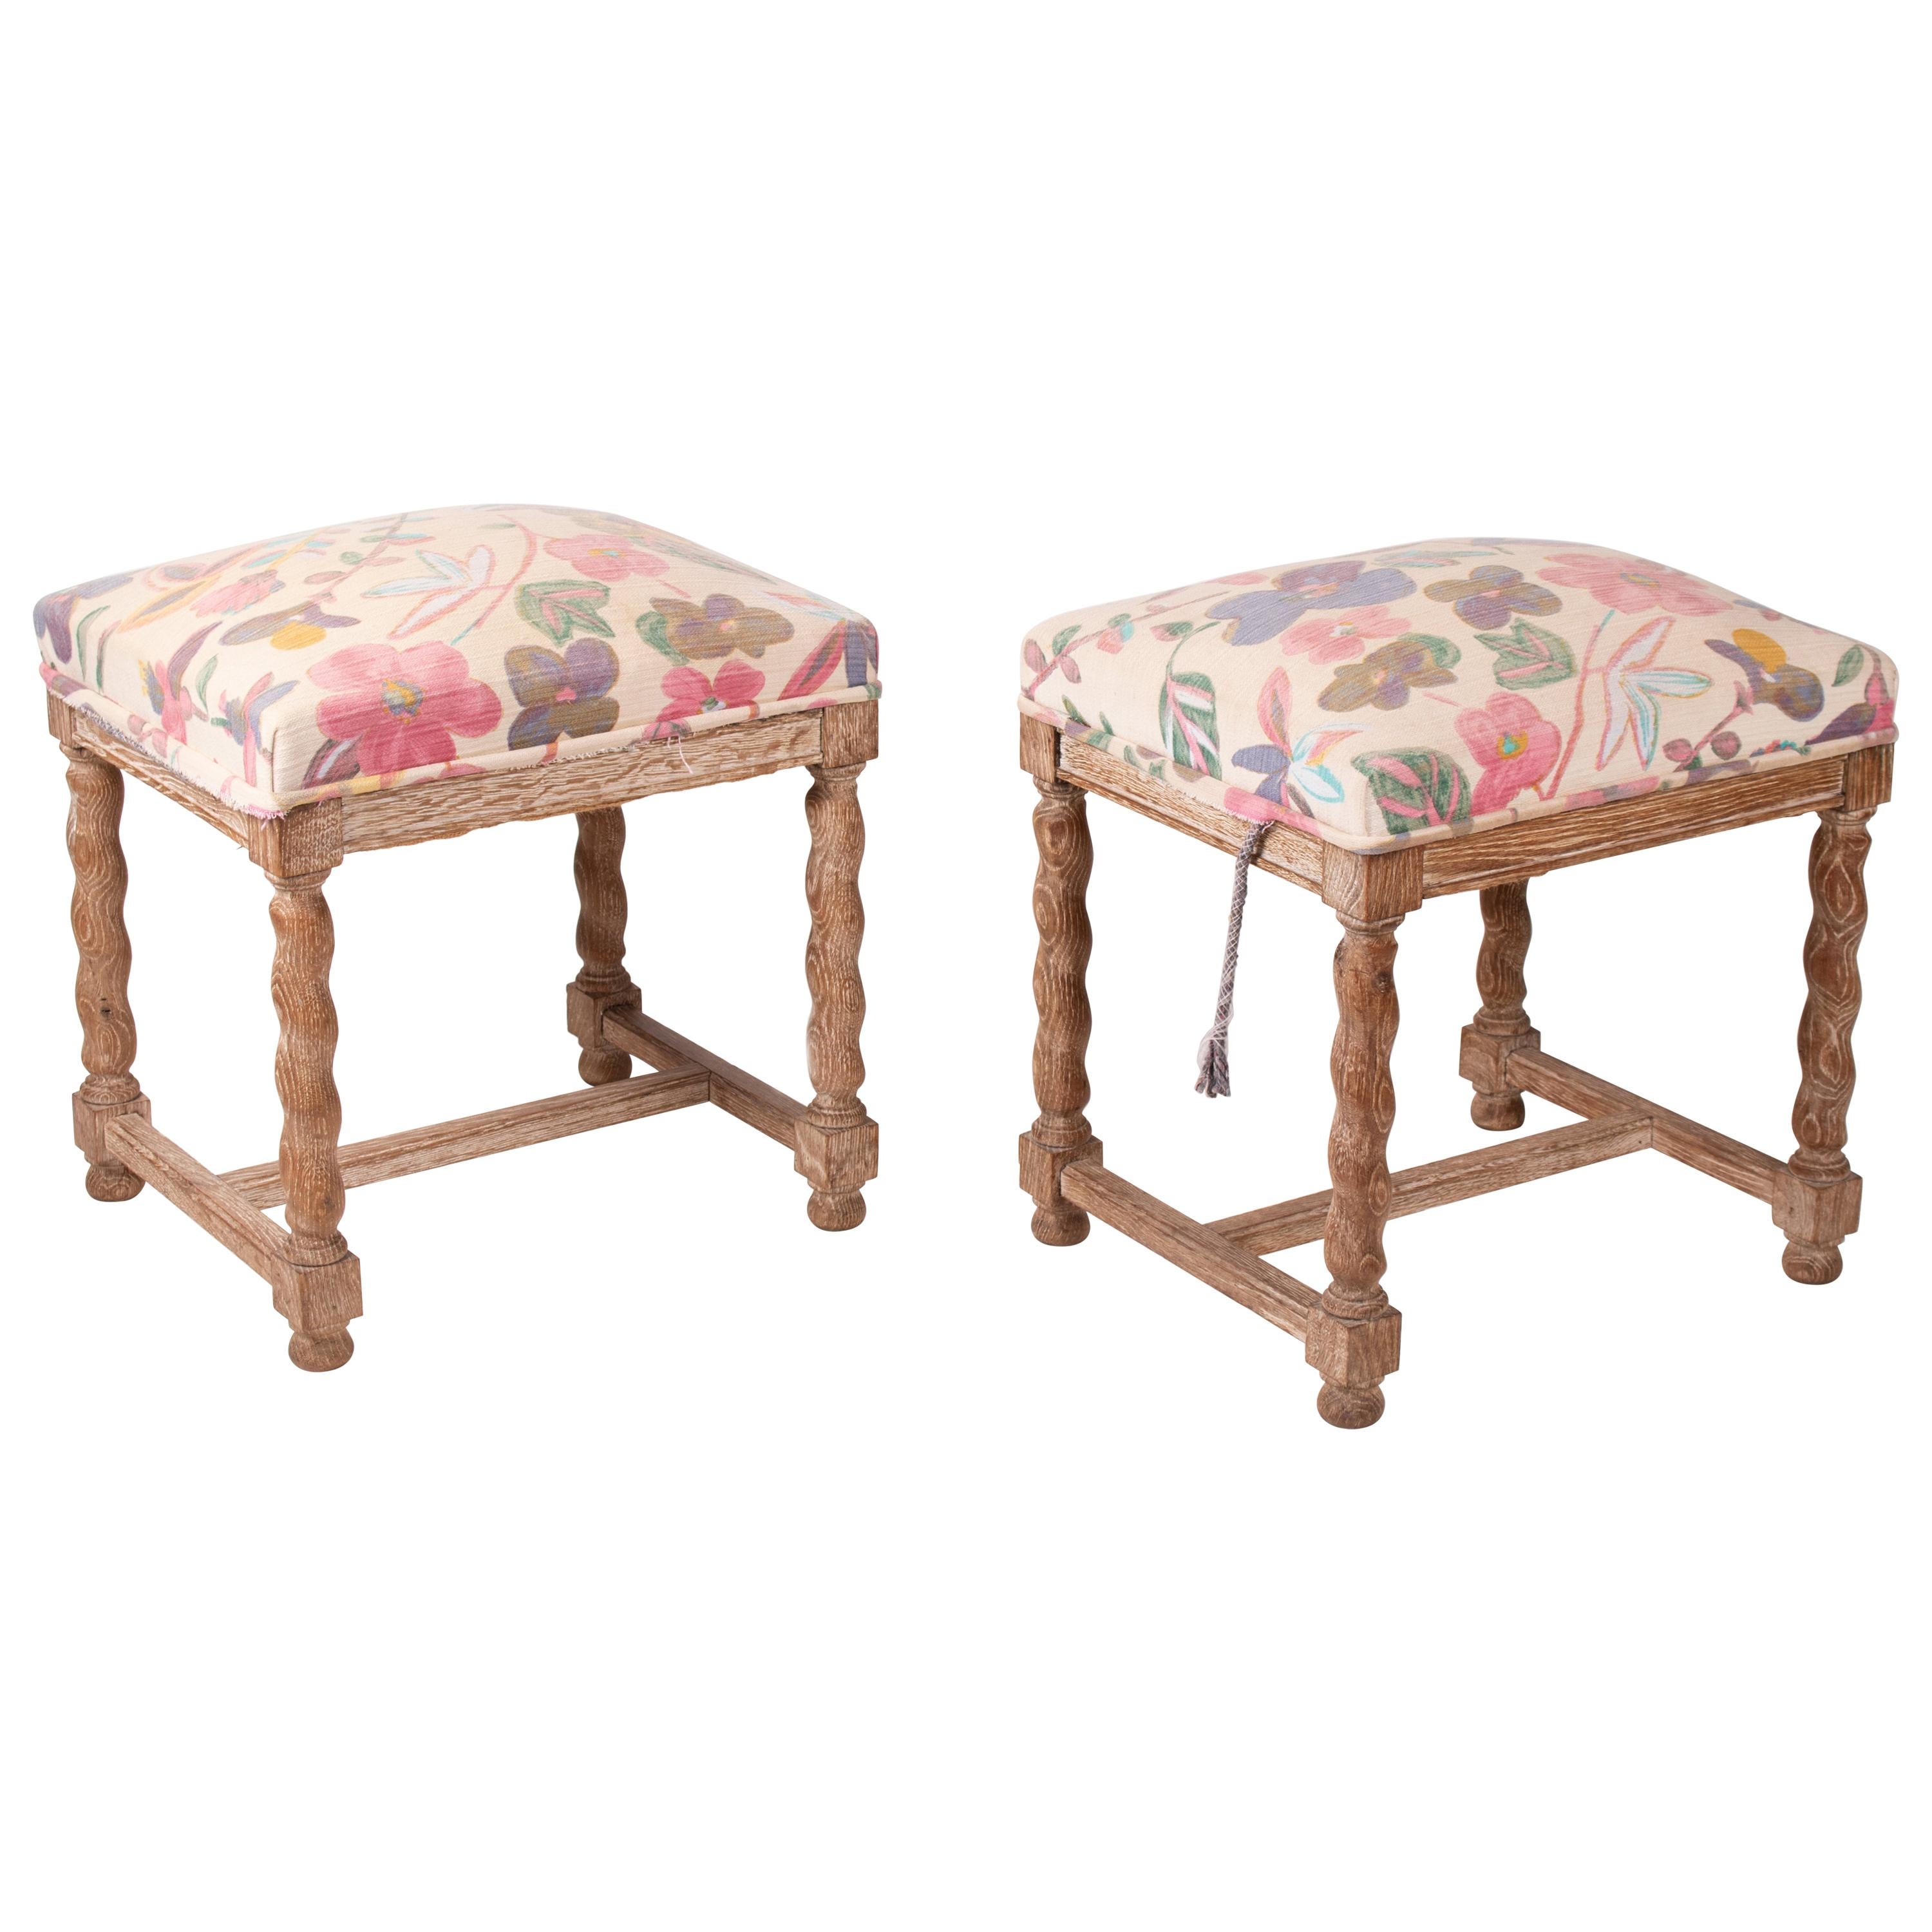 Pair of French Style Carved Wooden Upholstered Stools in Vintage Flower Pattern